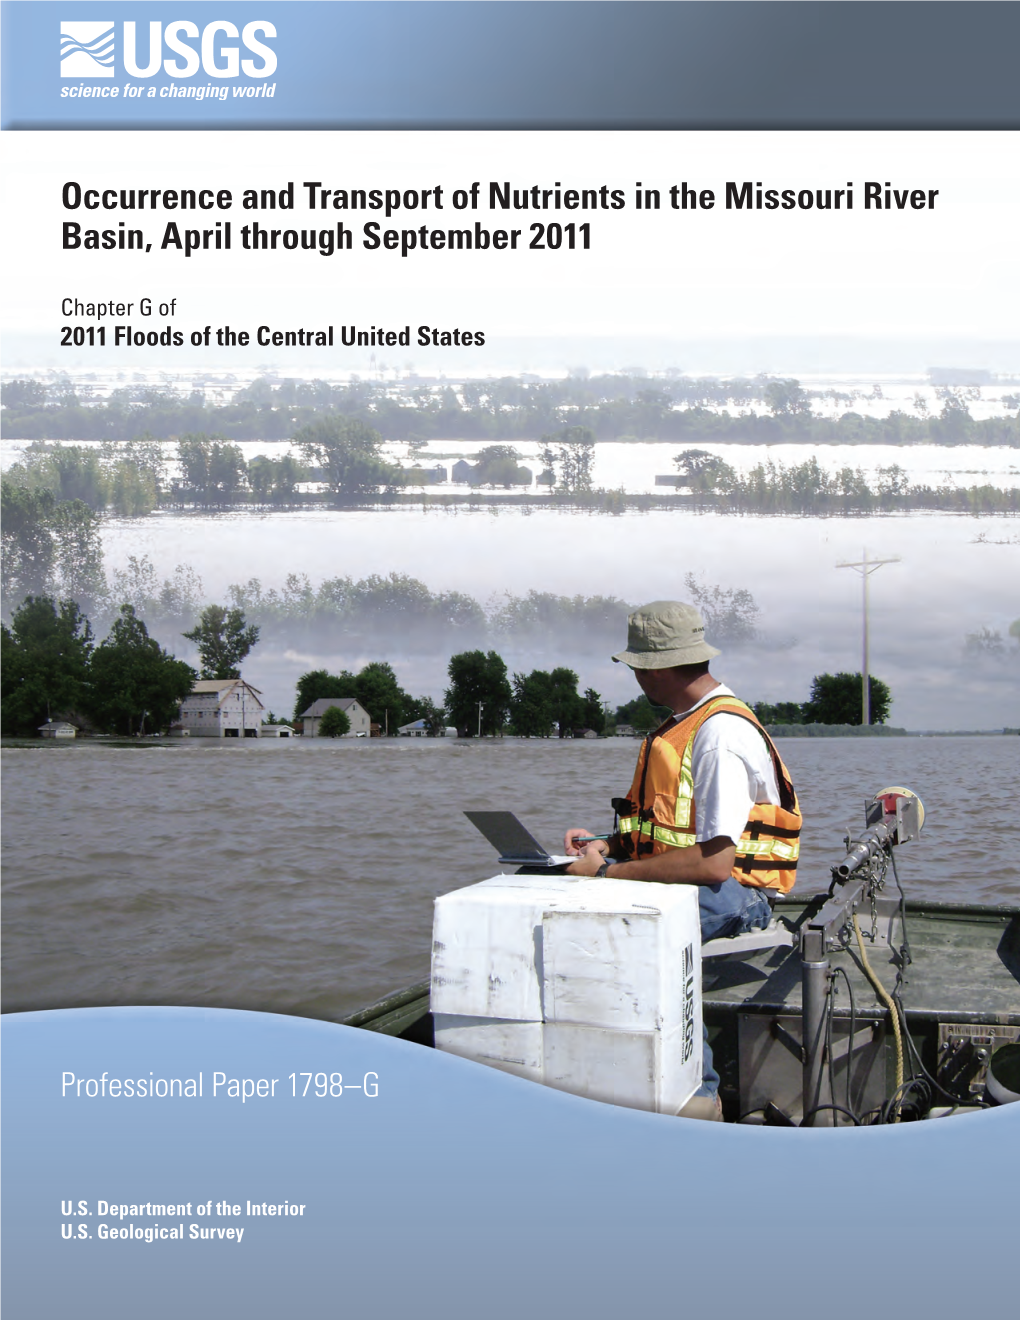 Occurrence and Transport of Nutrients in the Missouri River Basin, April Through September 2011